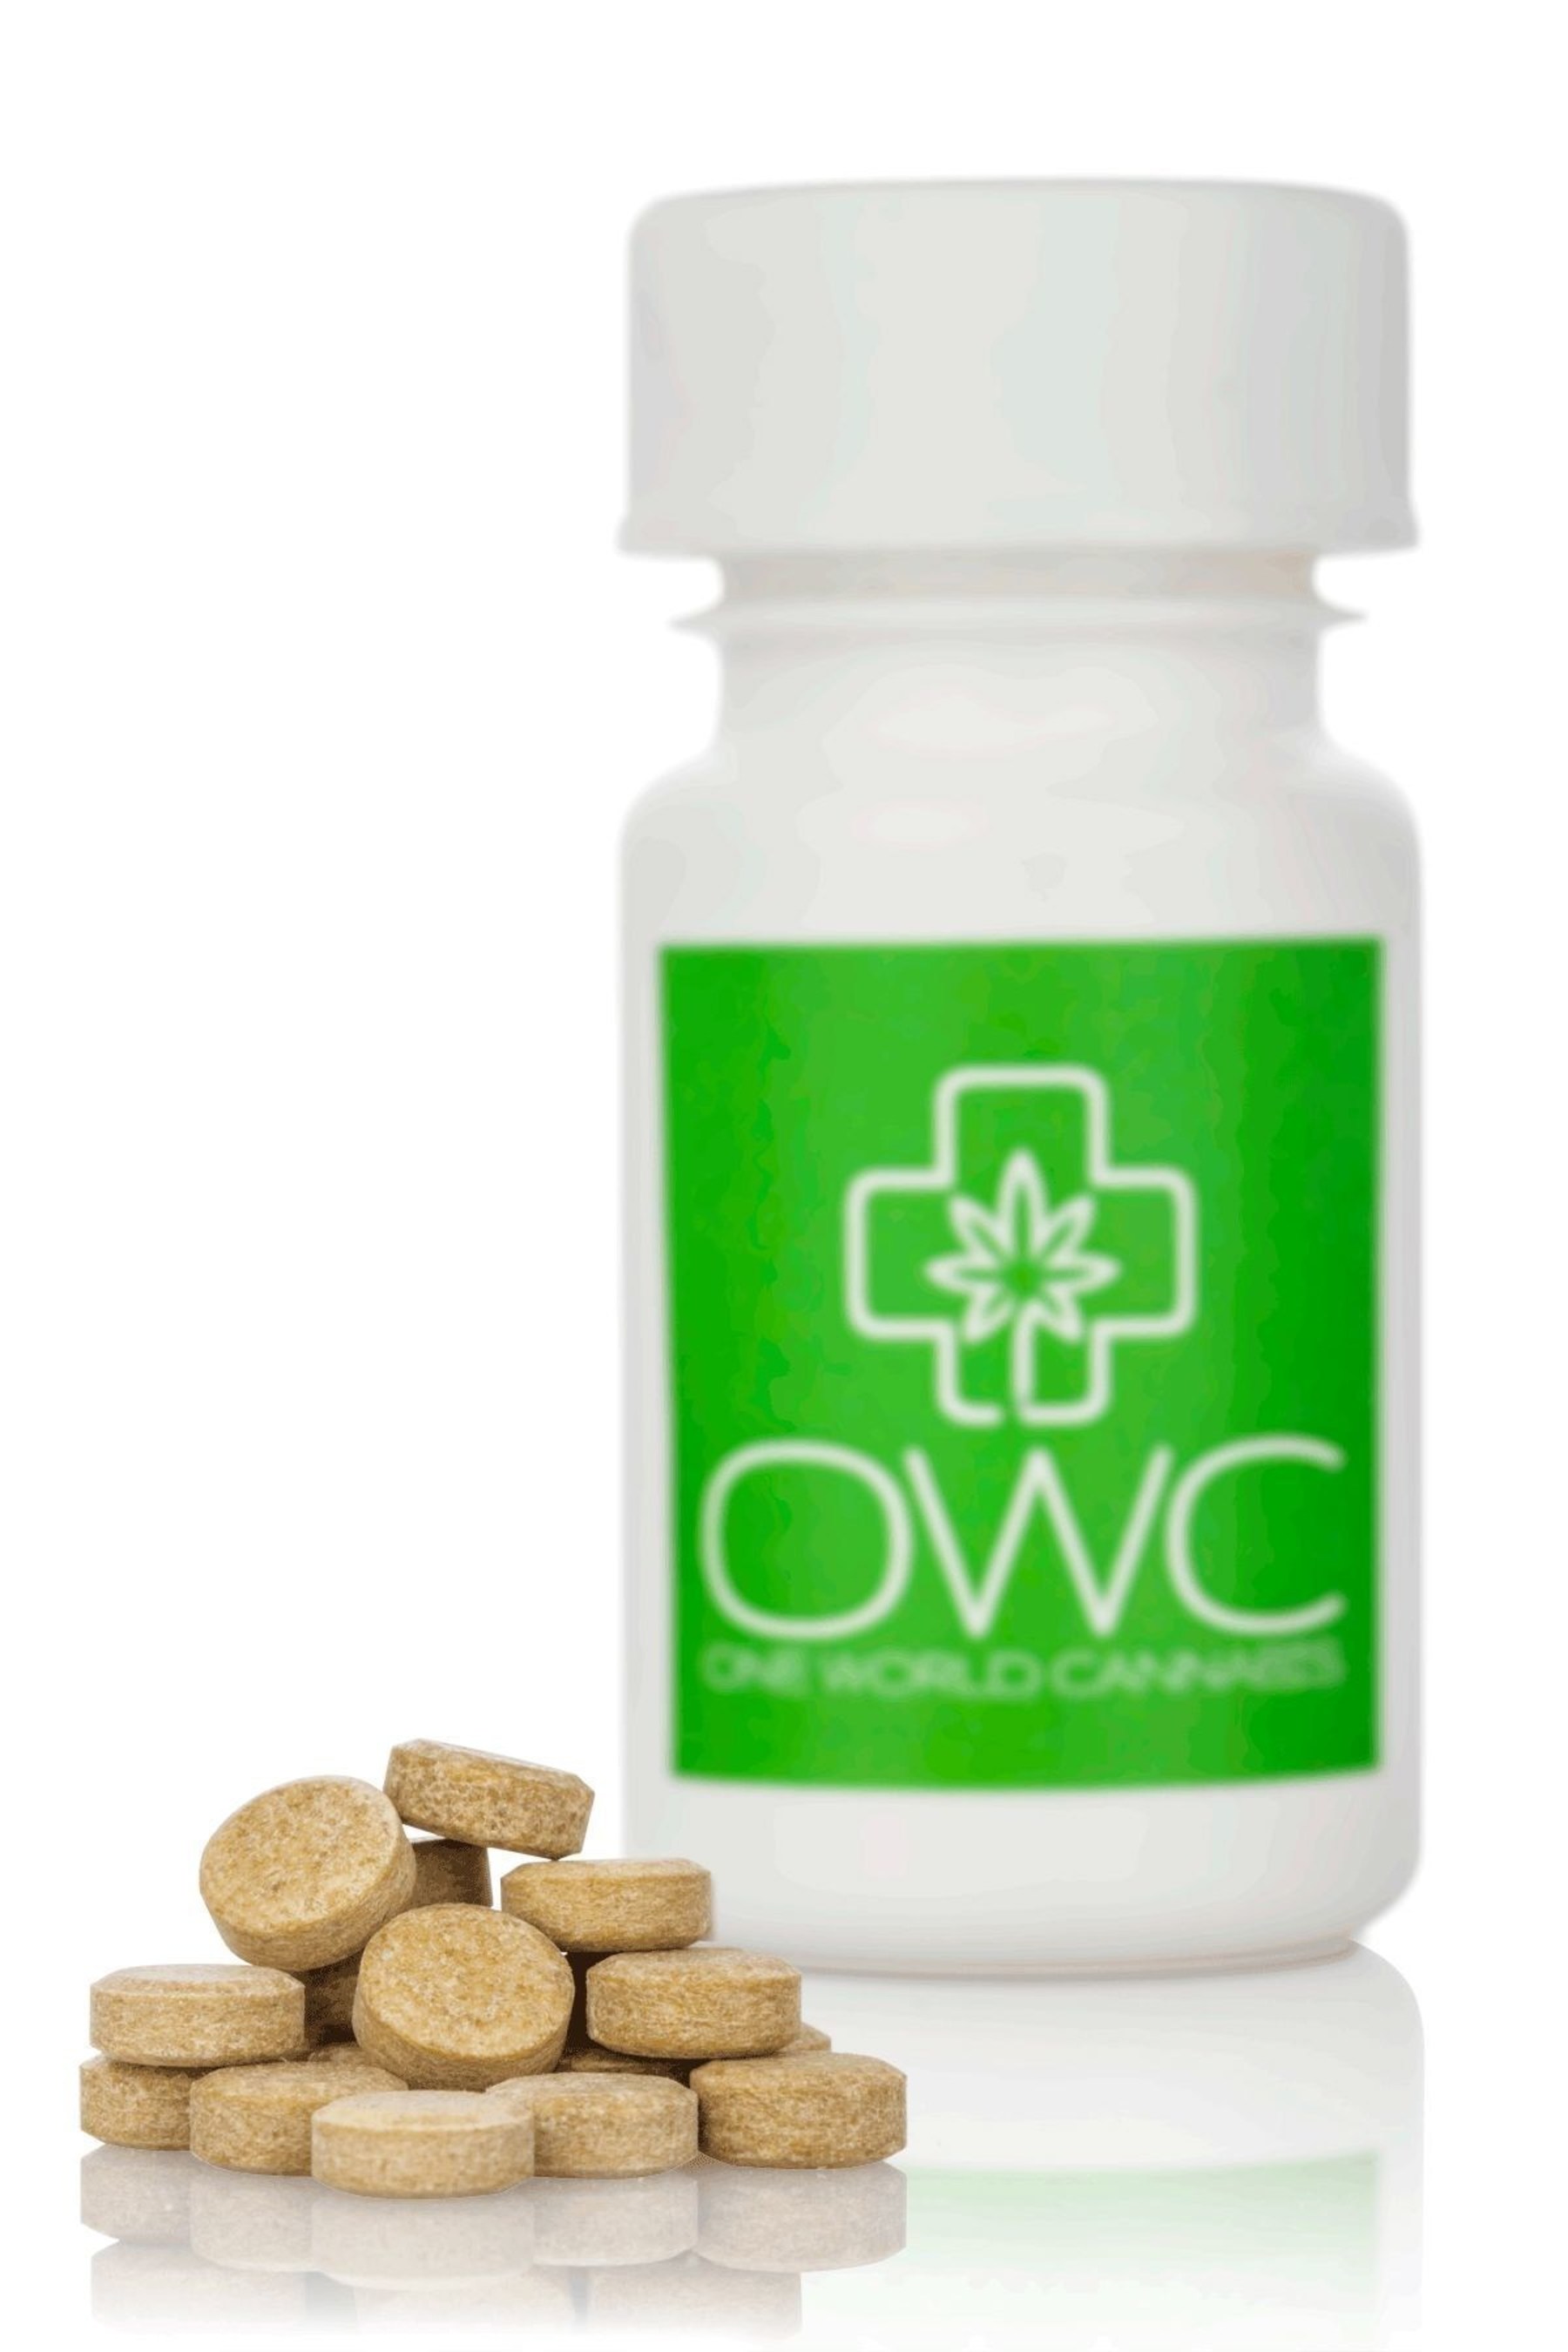 Cannabinoids-enriched soluble tablets for sublingual use. It's a Smoke-Free alternative for patients using medical cannabis (PRNewsFoto/OWC Pharmaceutical Research Corp)